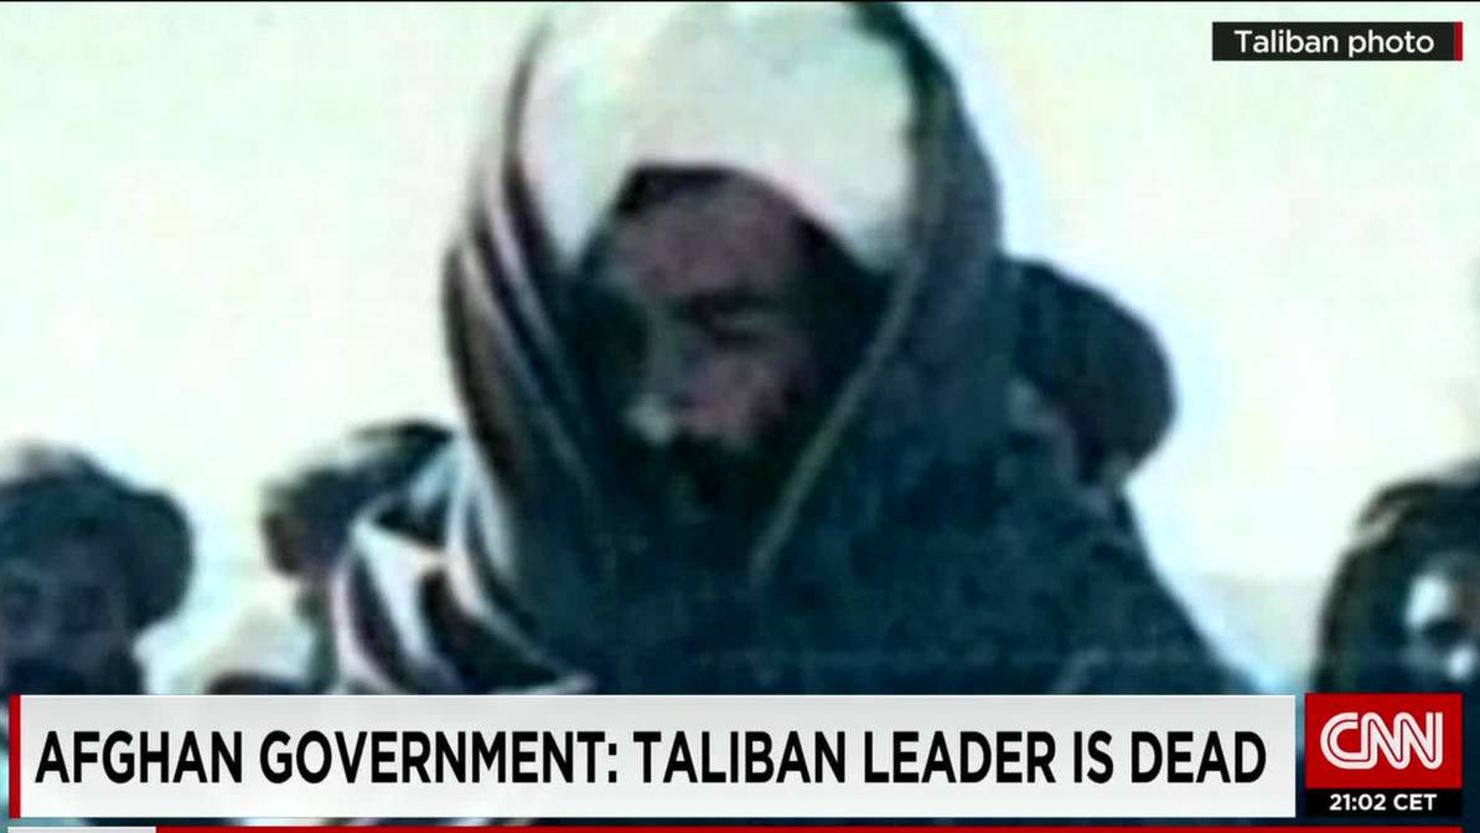 The Taliban say Mullah Mohammed Omar's death was kept secret for more than two years.